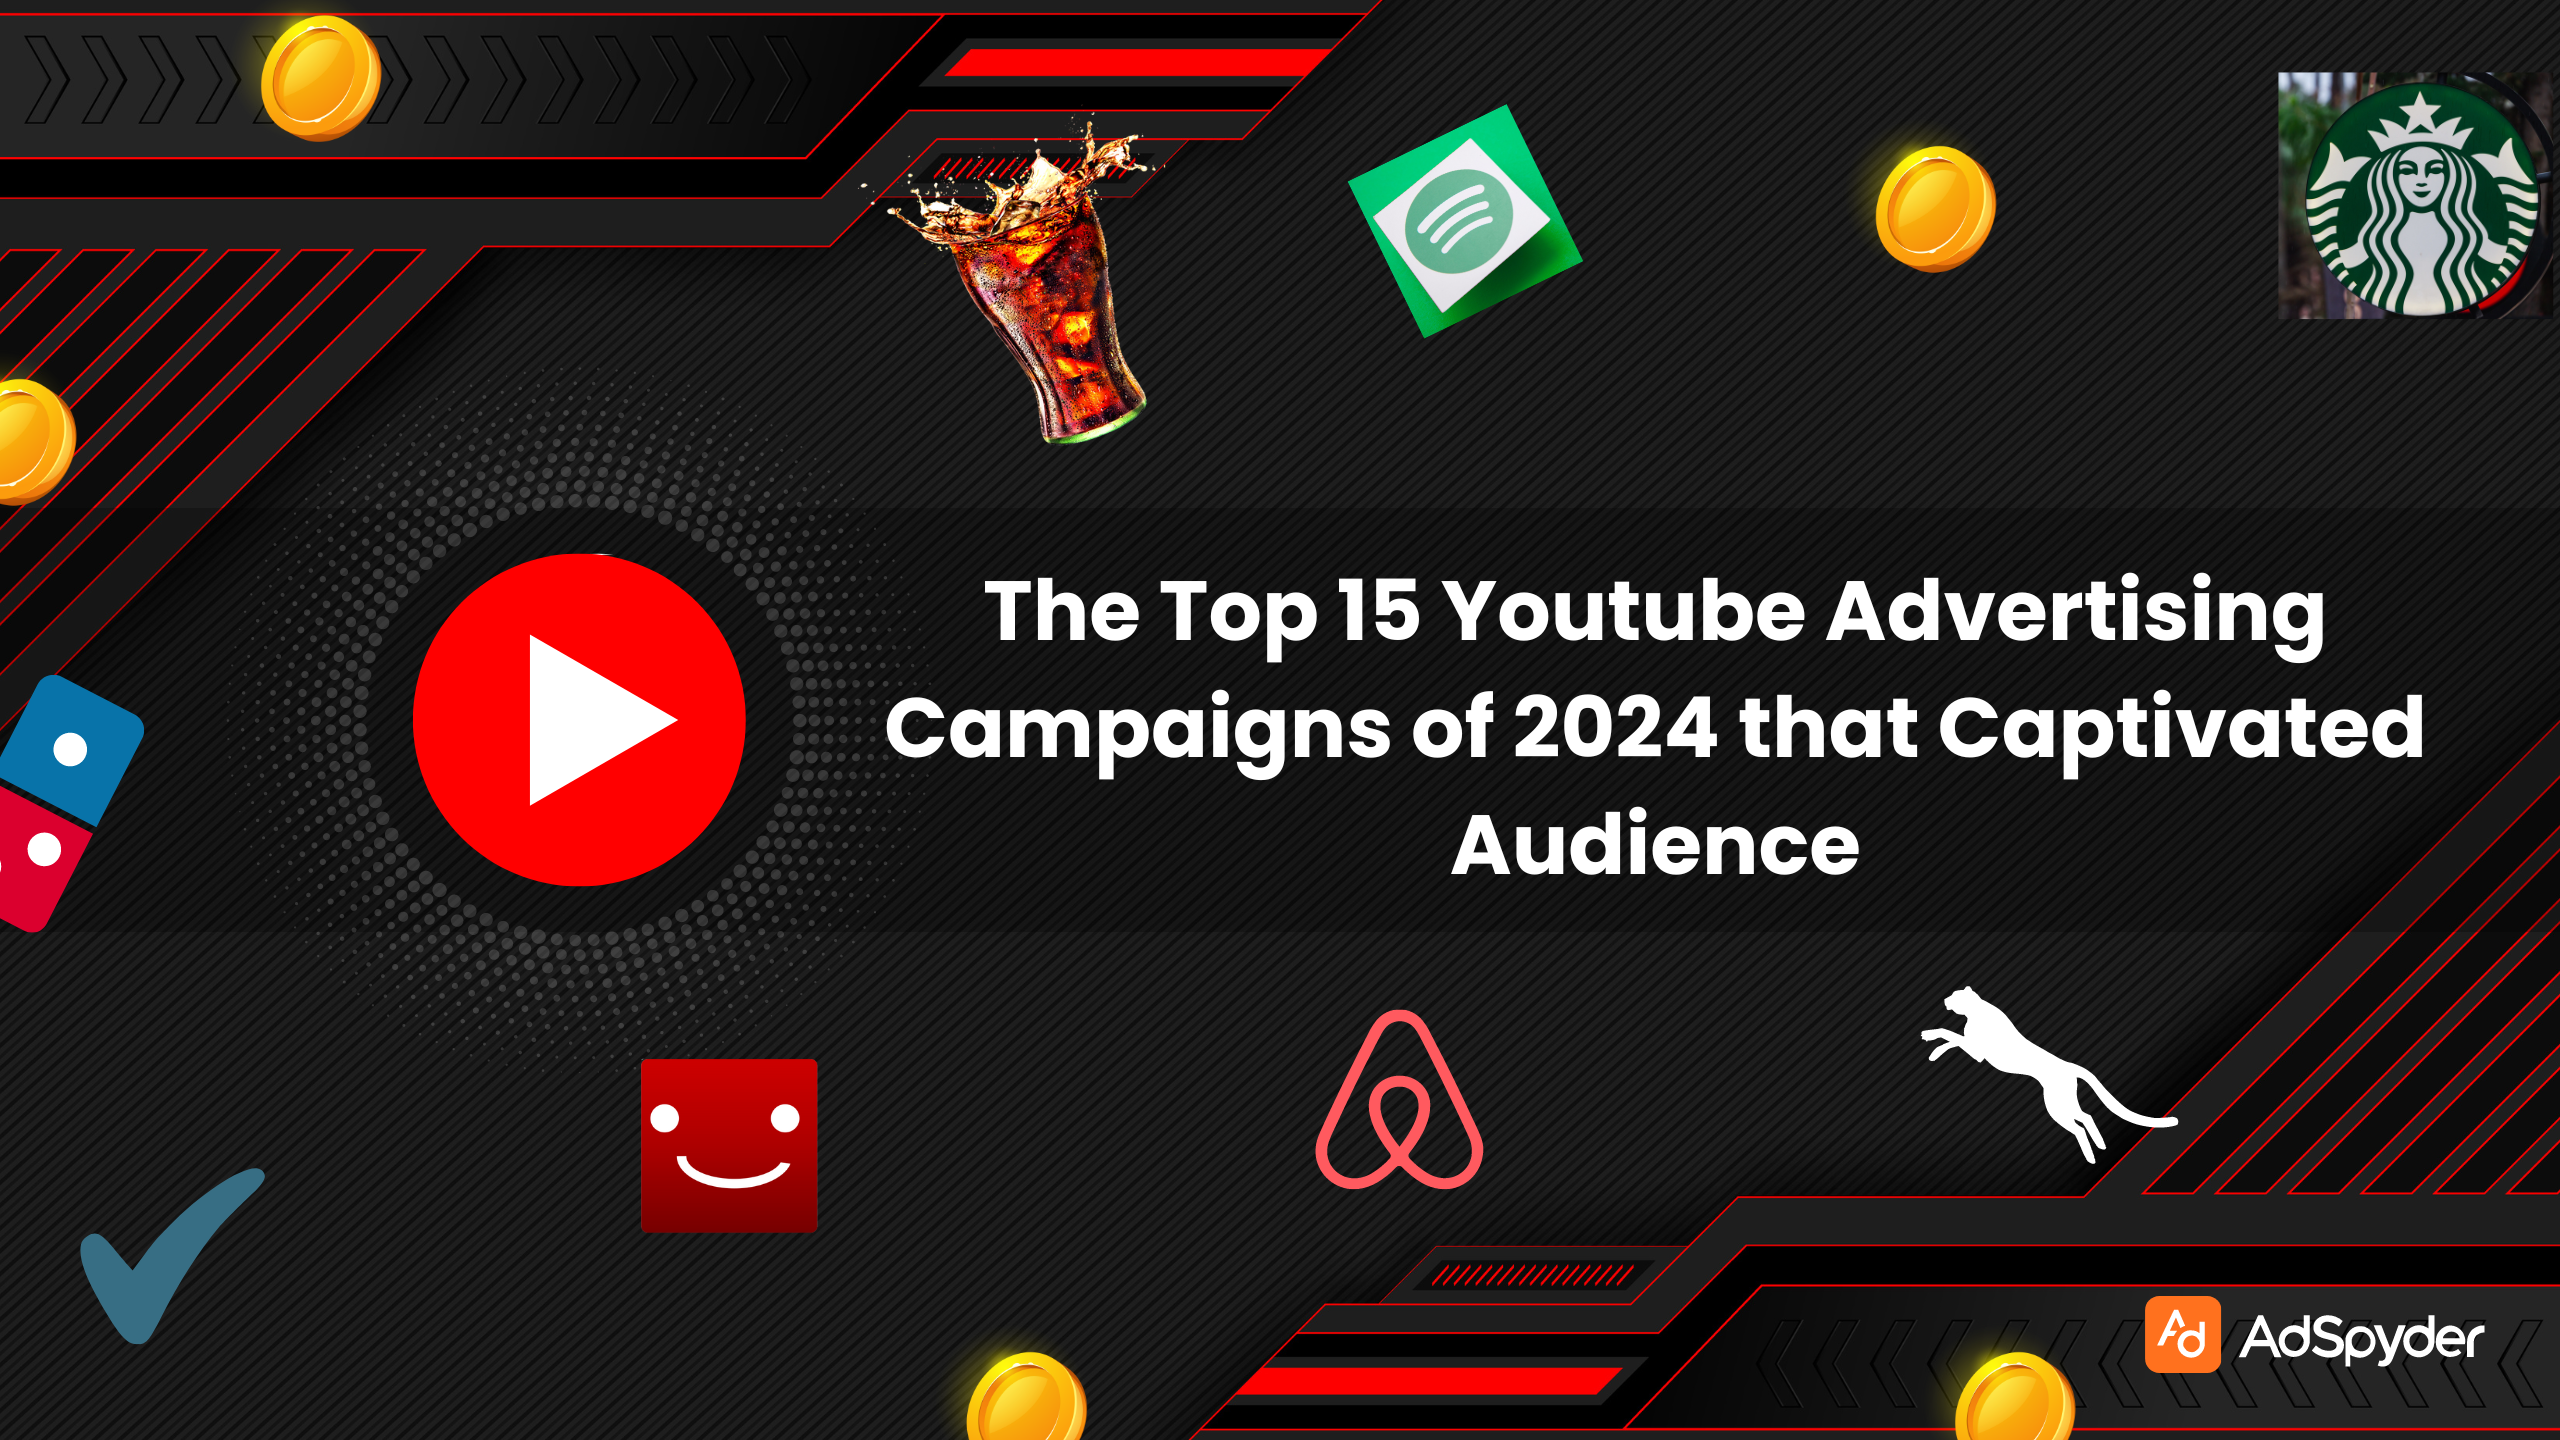 Top 15 YouTube Advertising Campaigns 2024 That Captivated Audiences